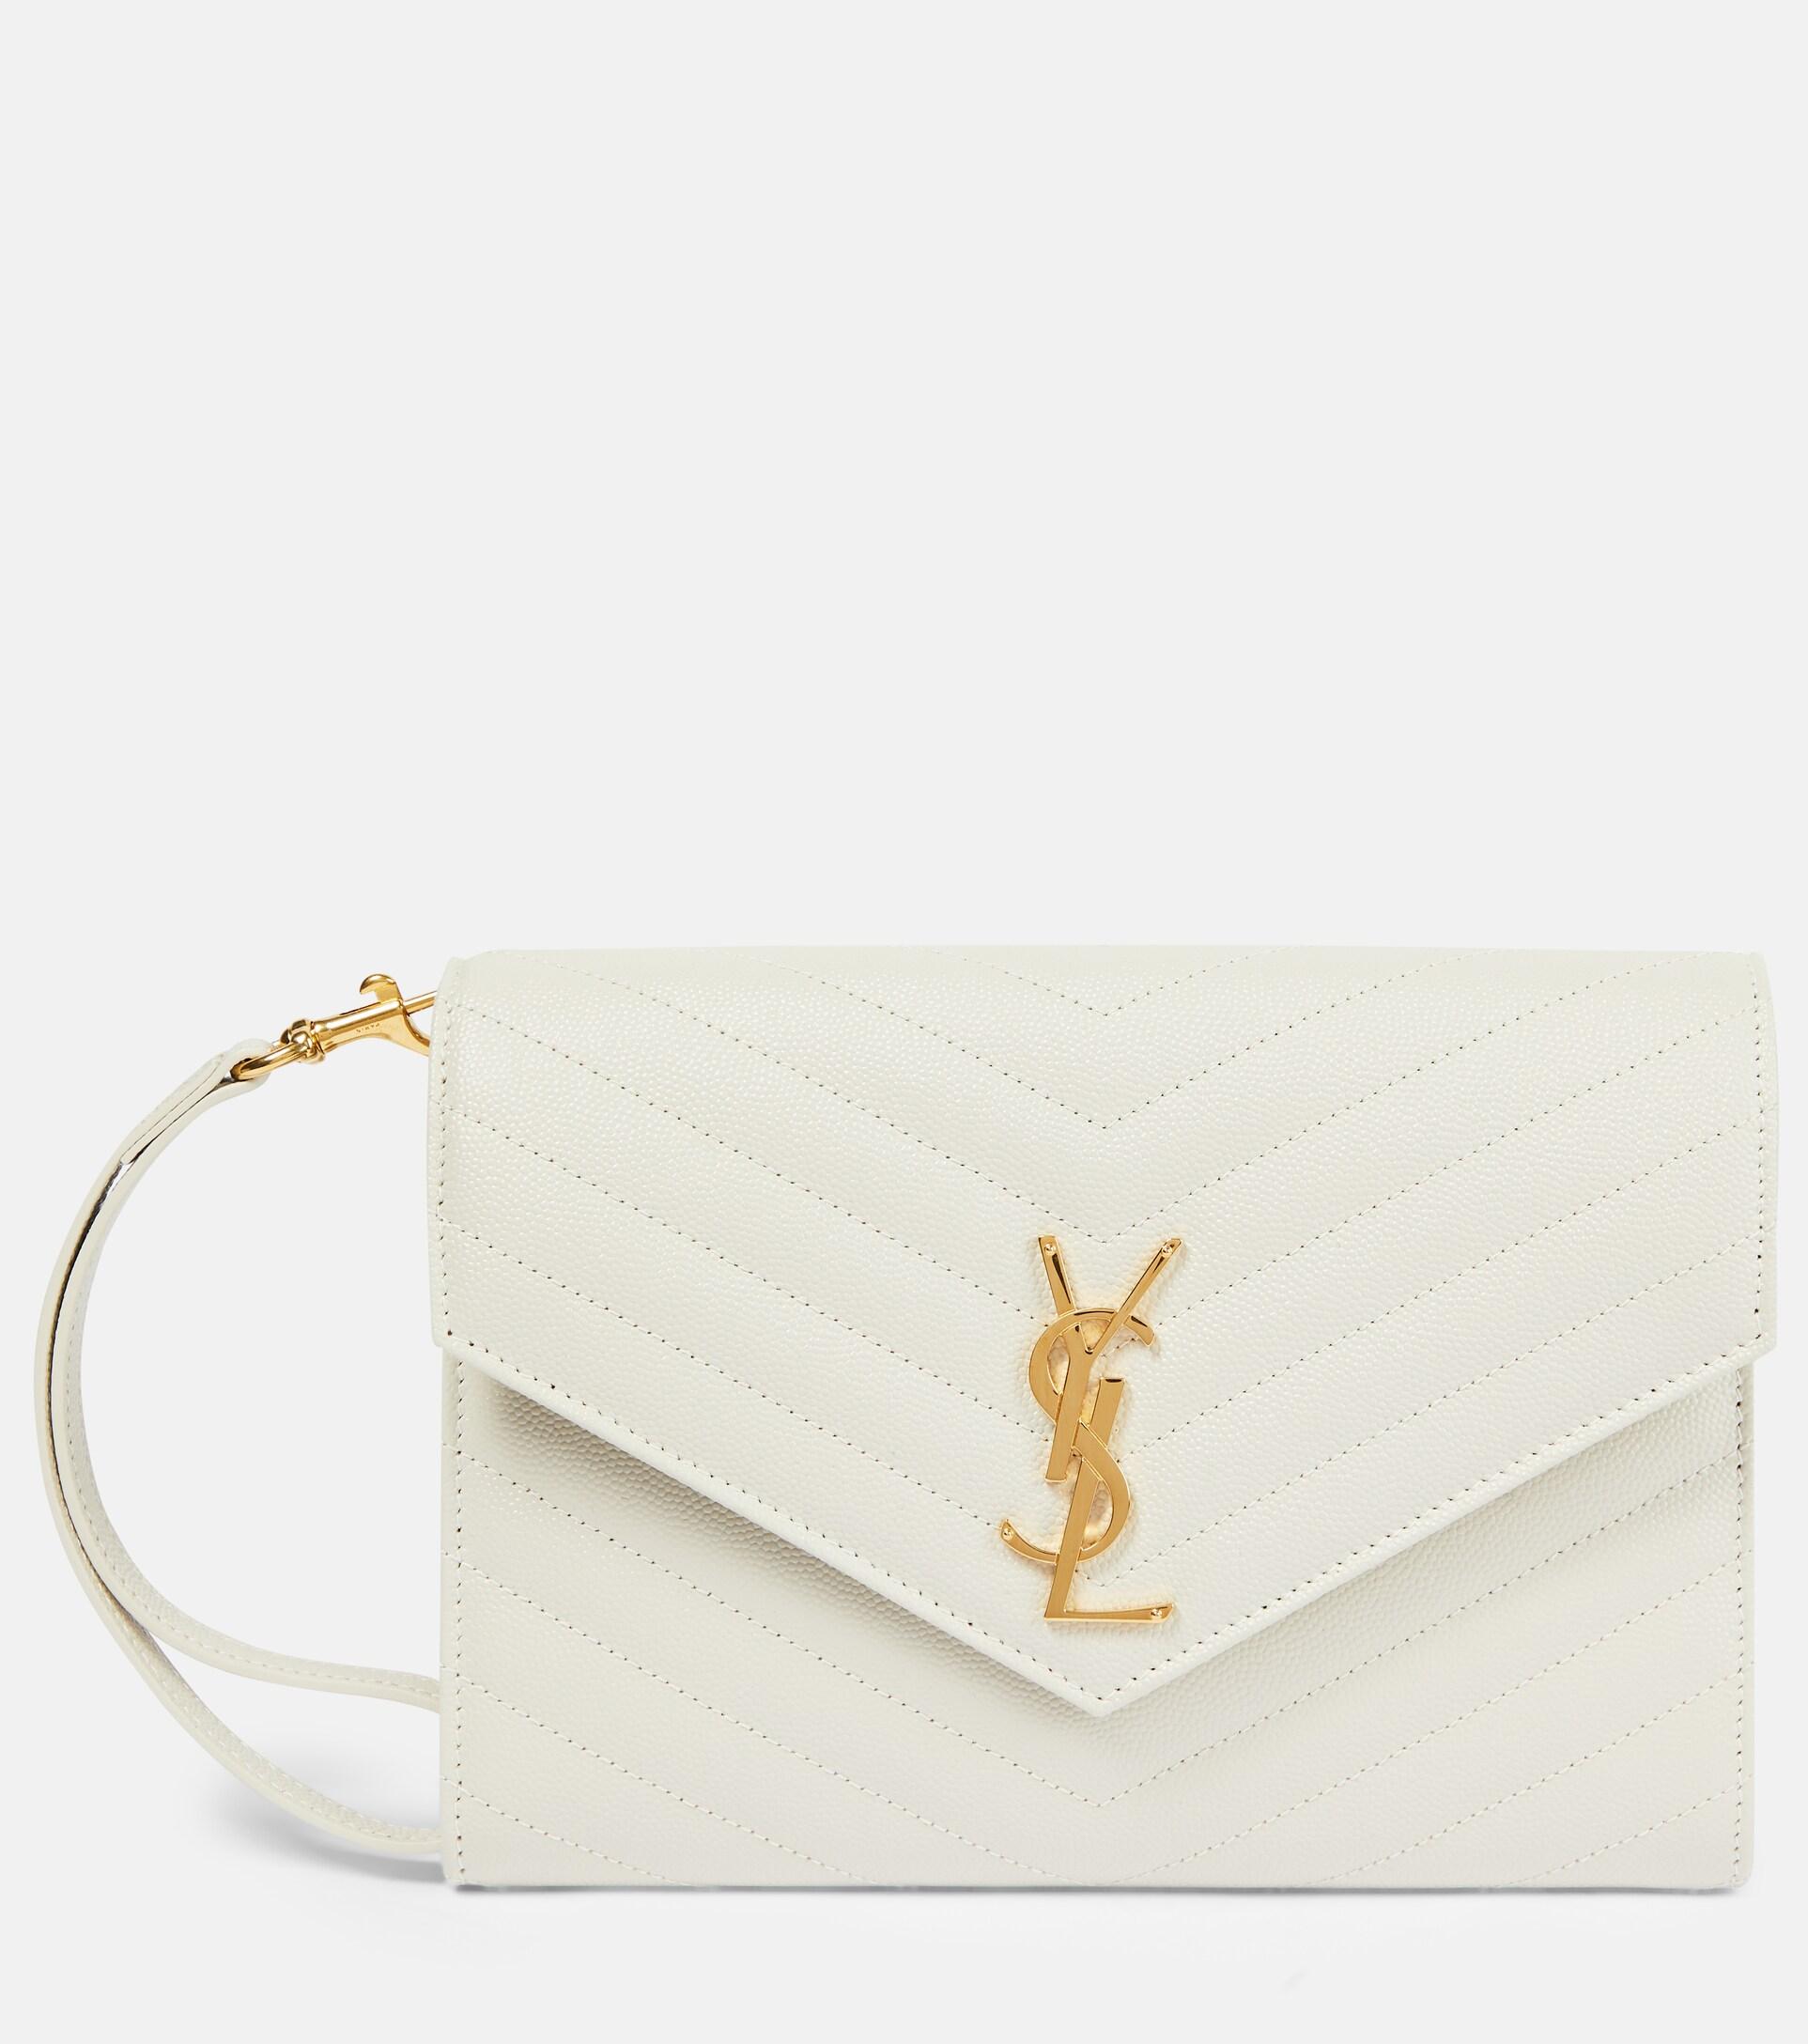 UPTOWN pouch in CROCODILE-EMBOSSED shiny leather | Saint Laurent | YSL.com